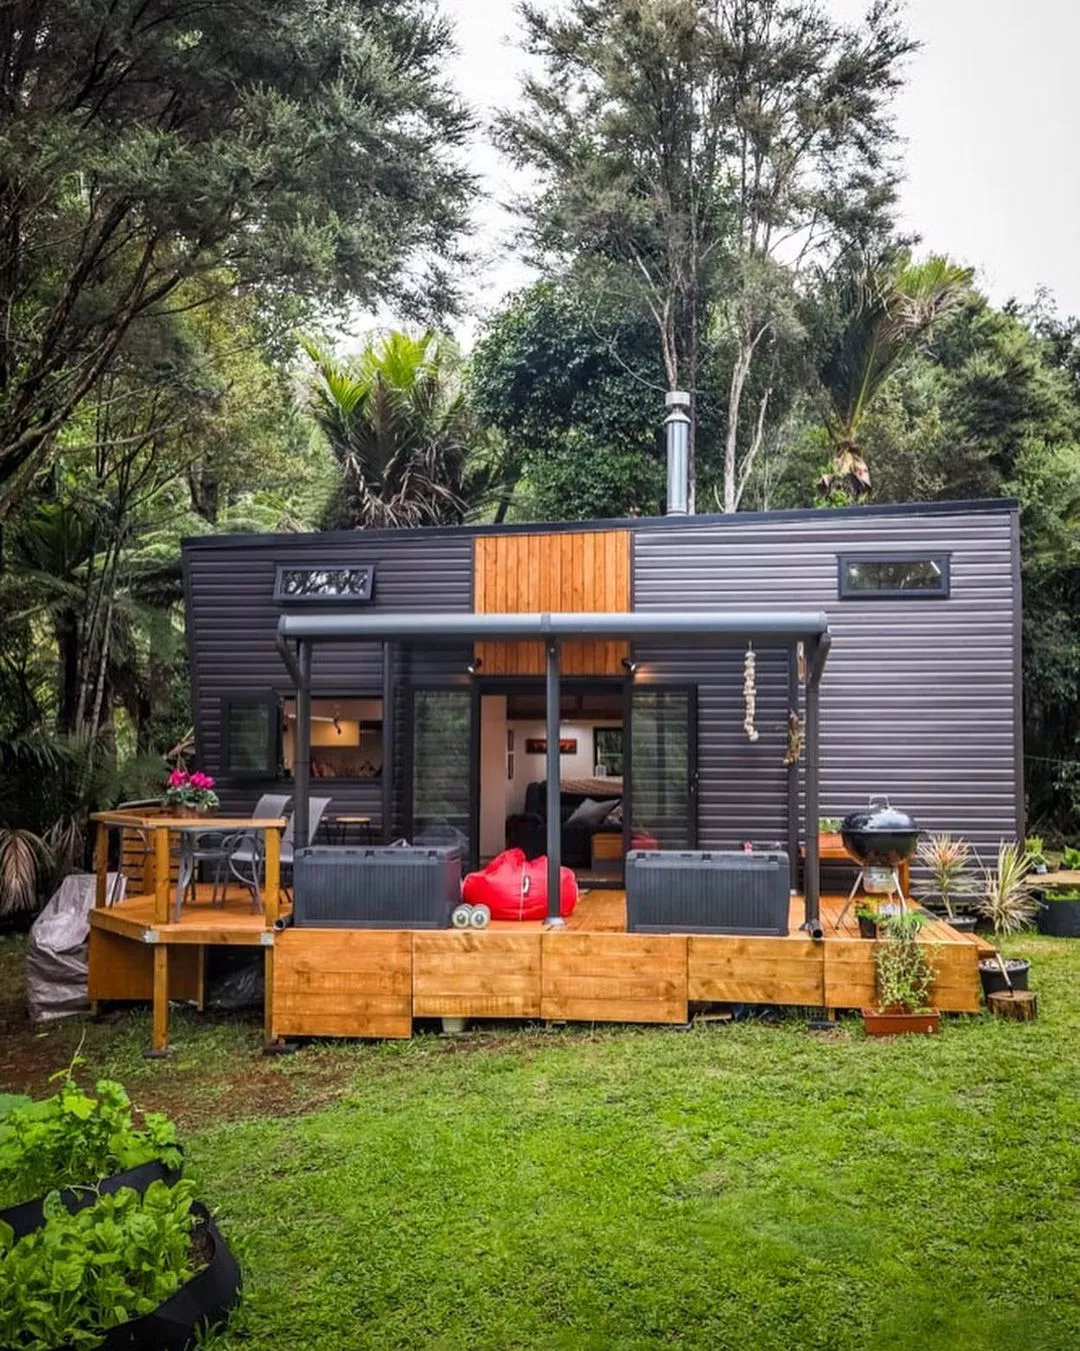 https://www.extraspace.com/blog/wp-content/uploads/2021/06/shipping-container-homes-101-how-much-does-a-shipping-container-home-cost.jpeg.webp